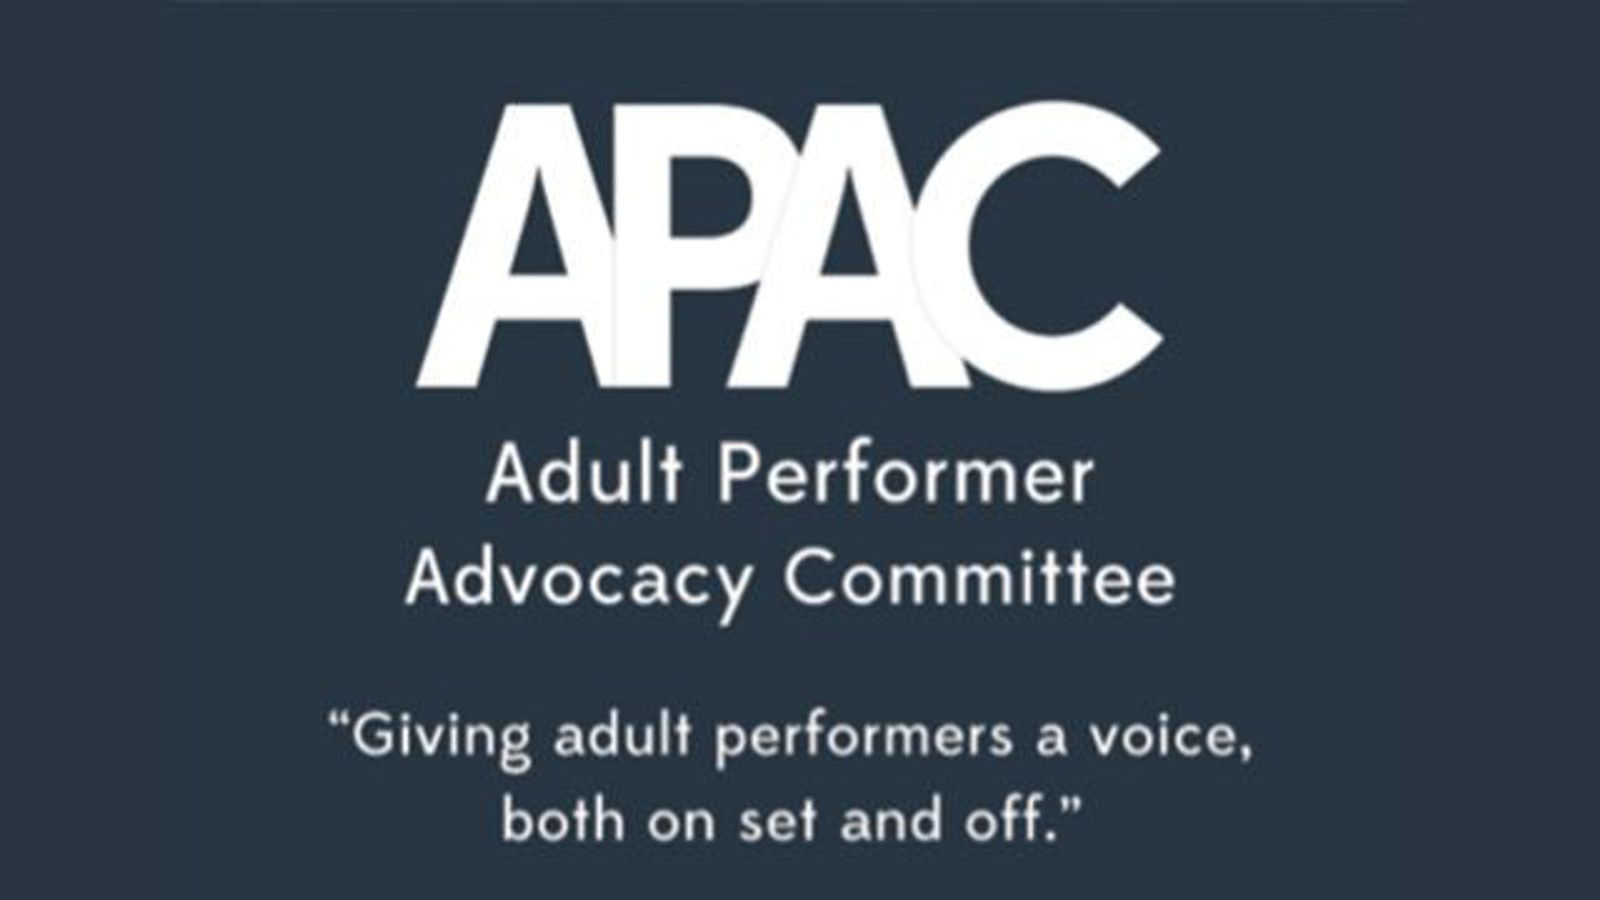 APAC Issues Statement, Urges ‘Compassion’ During Production Hold